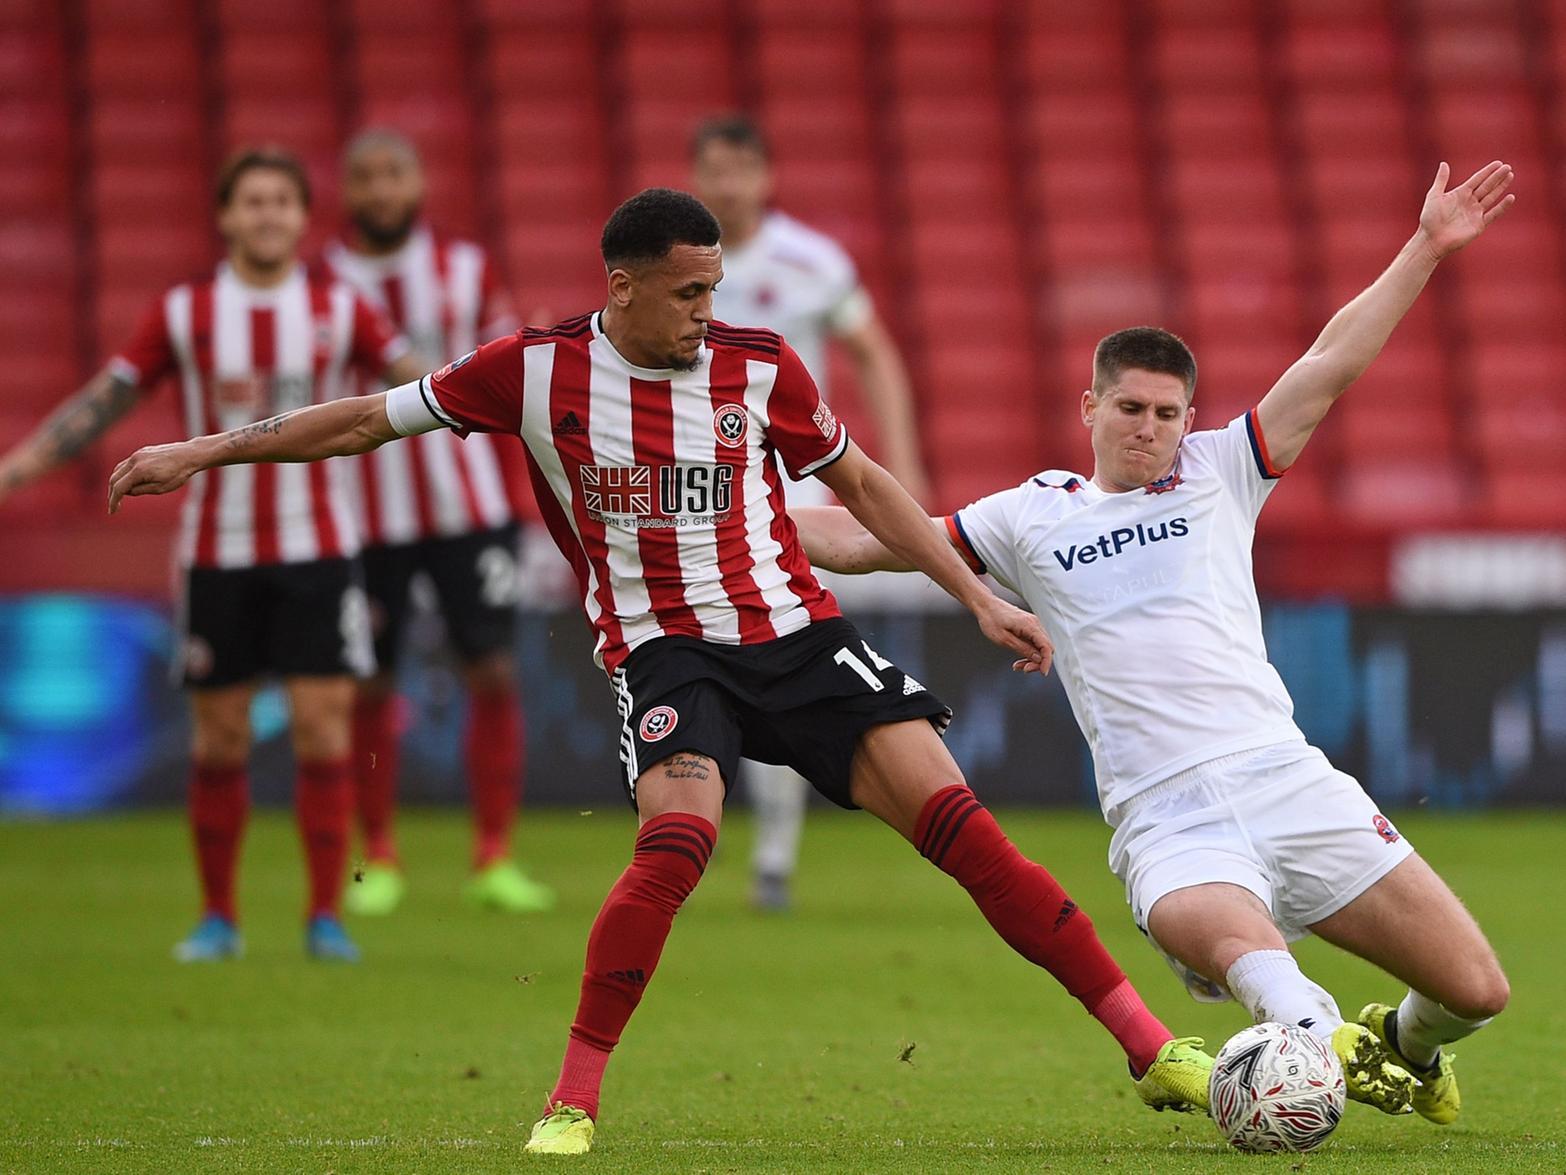 Middlesbrough boss Jonanthan Woodgate has back Sheffield United's Ravel Morrison to shine during his loan spell with the club, as he looks to revive his career with the relegation battlers. (Hartlepool Mail)